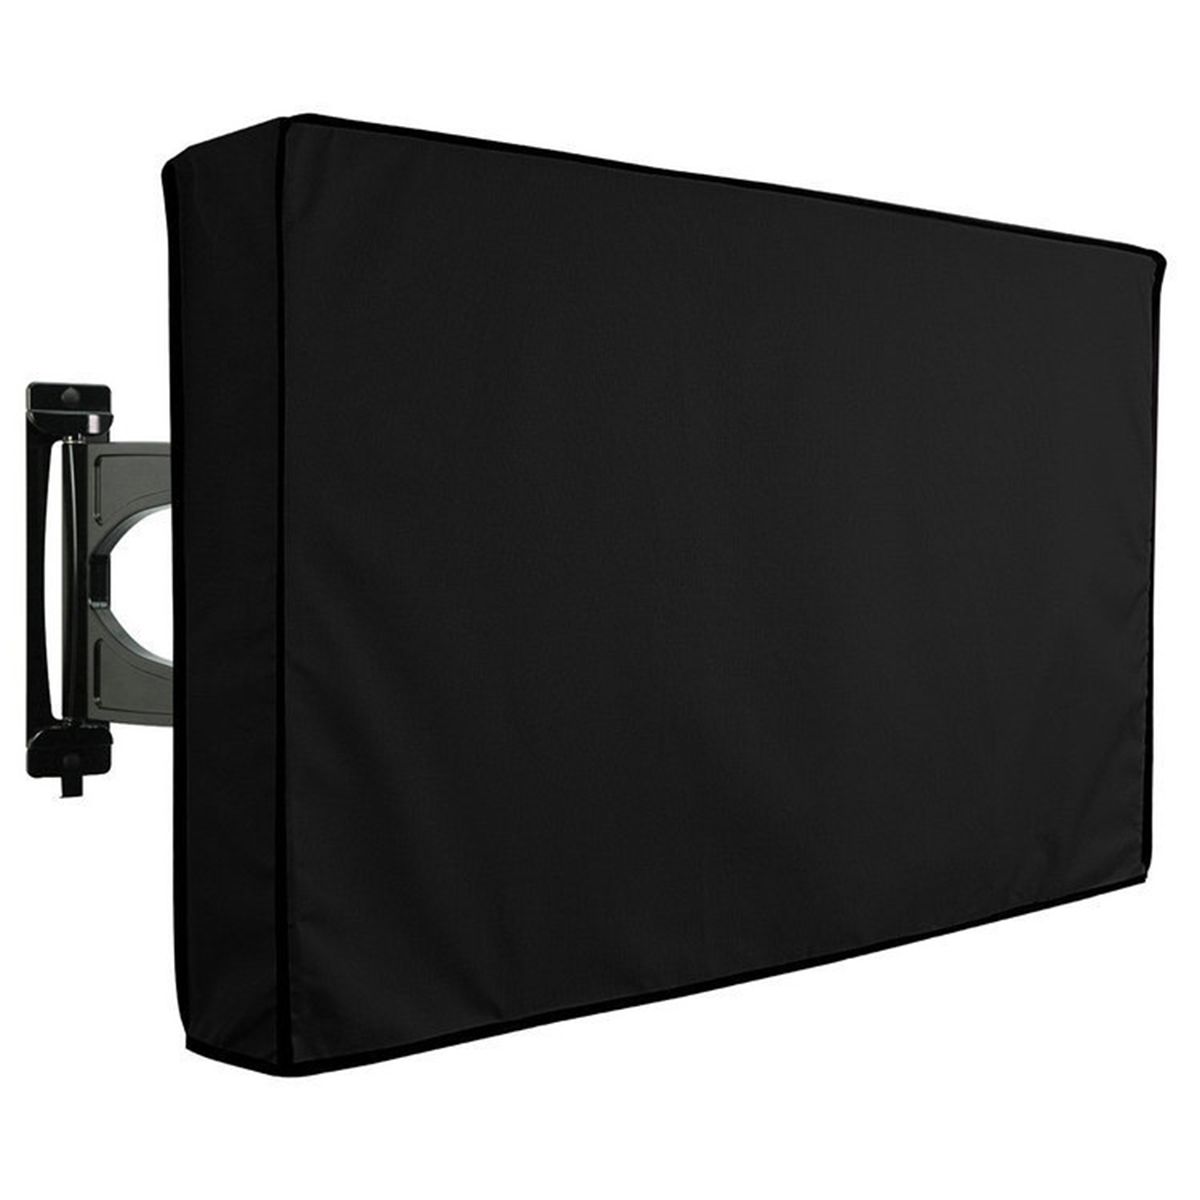 Black-600D-Outdoor-Fully-Dustproof-Weatherproof-TV-Cover-for-22-70-Inches-LED-LCD-Plasma-TVs-1673021